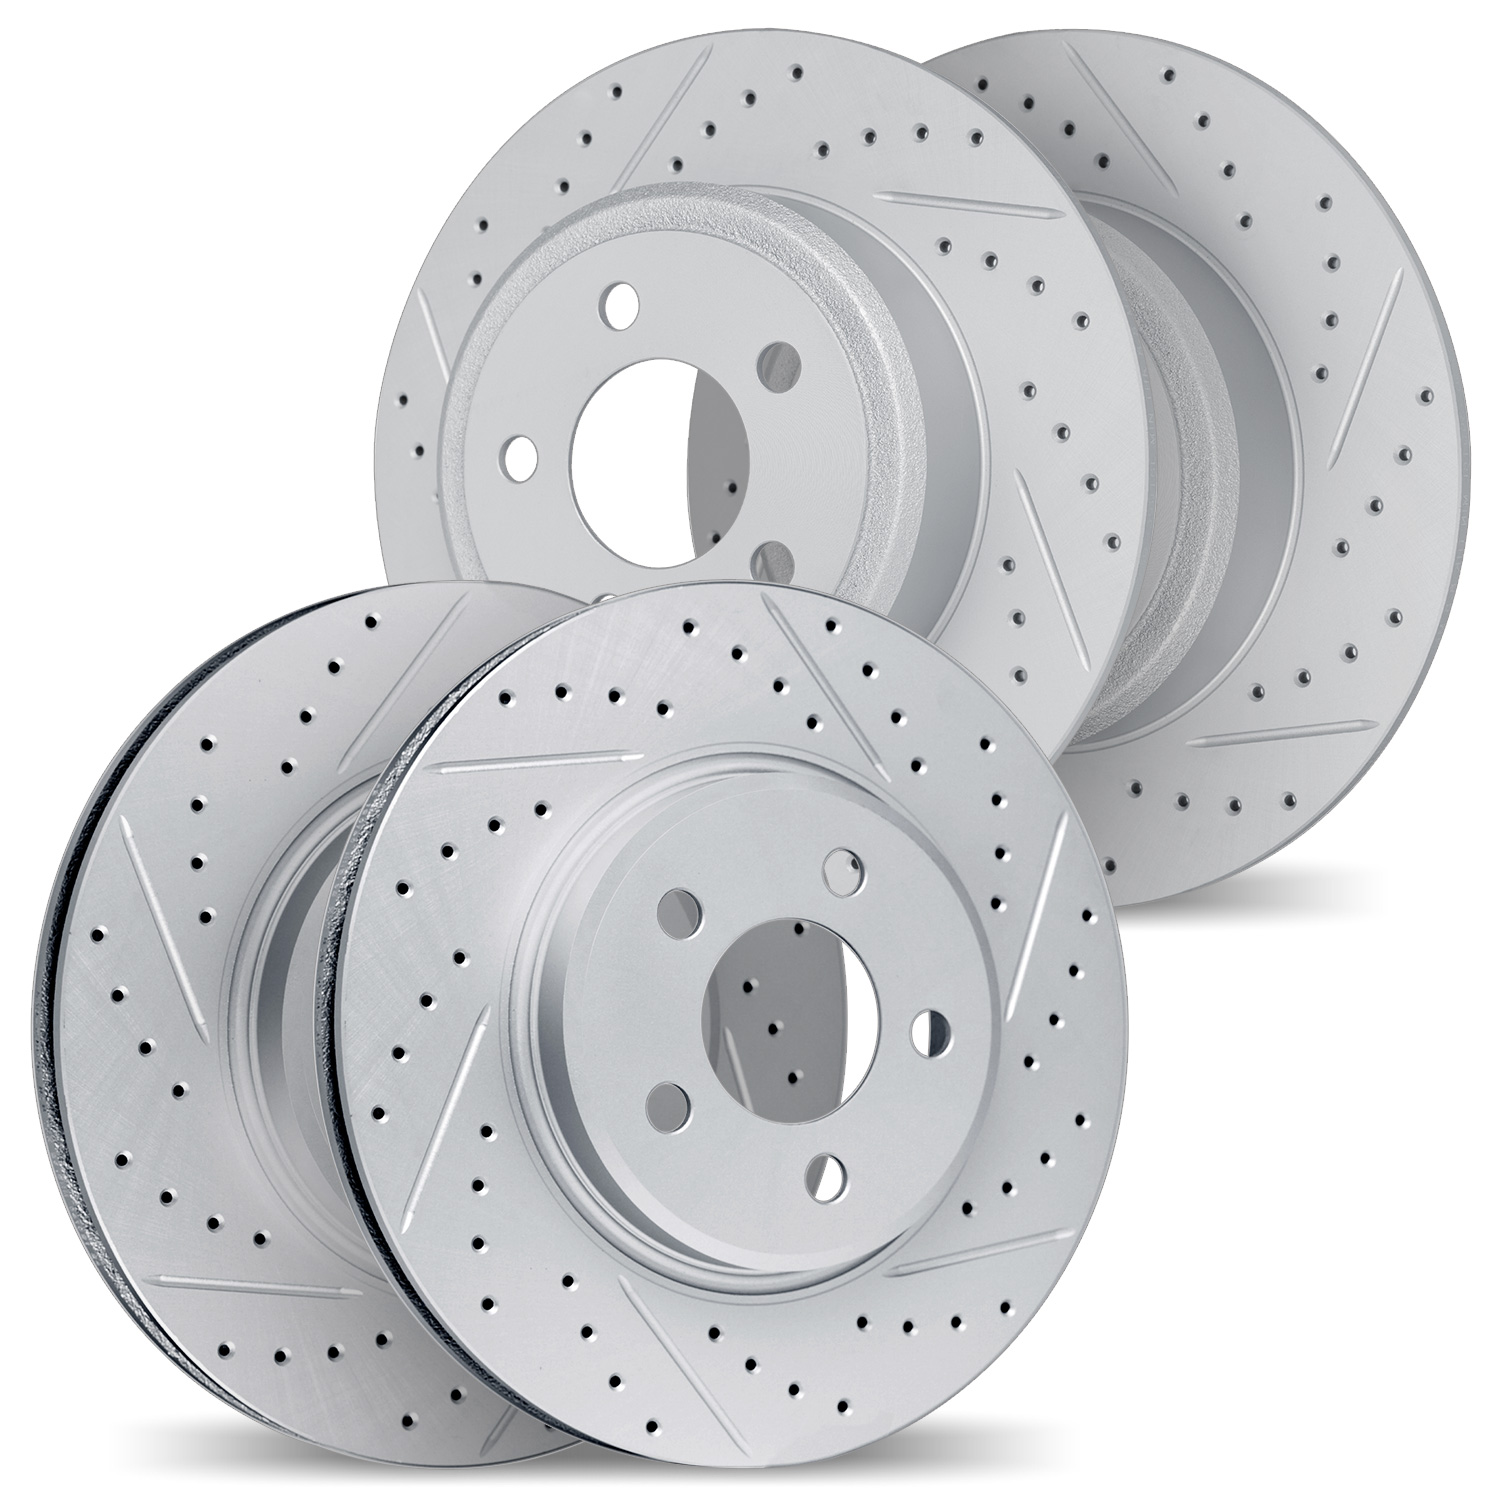 2004-67064 Geoperformance Drilled/Slotted Brake Rotors, 2007-2012 Infiniti/Nissan, Position: Front and Rear